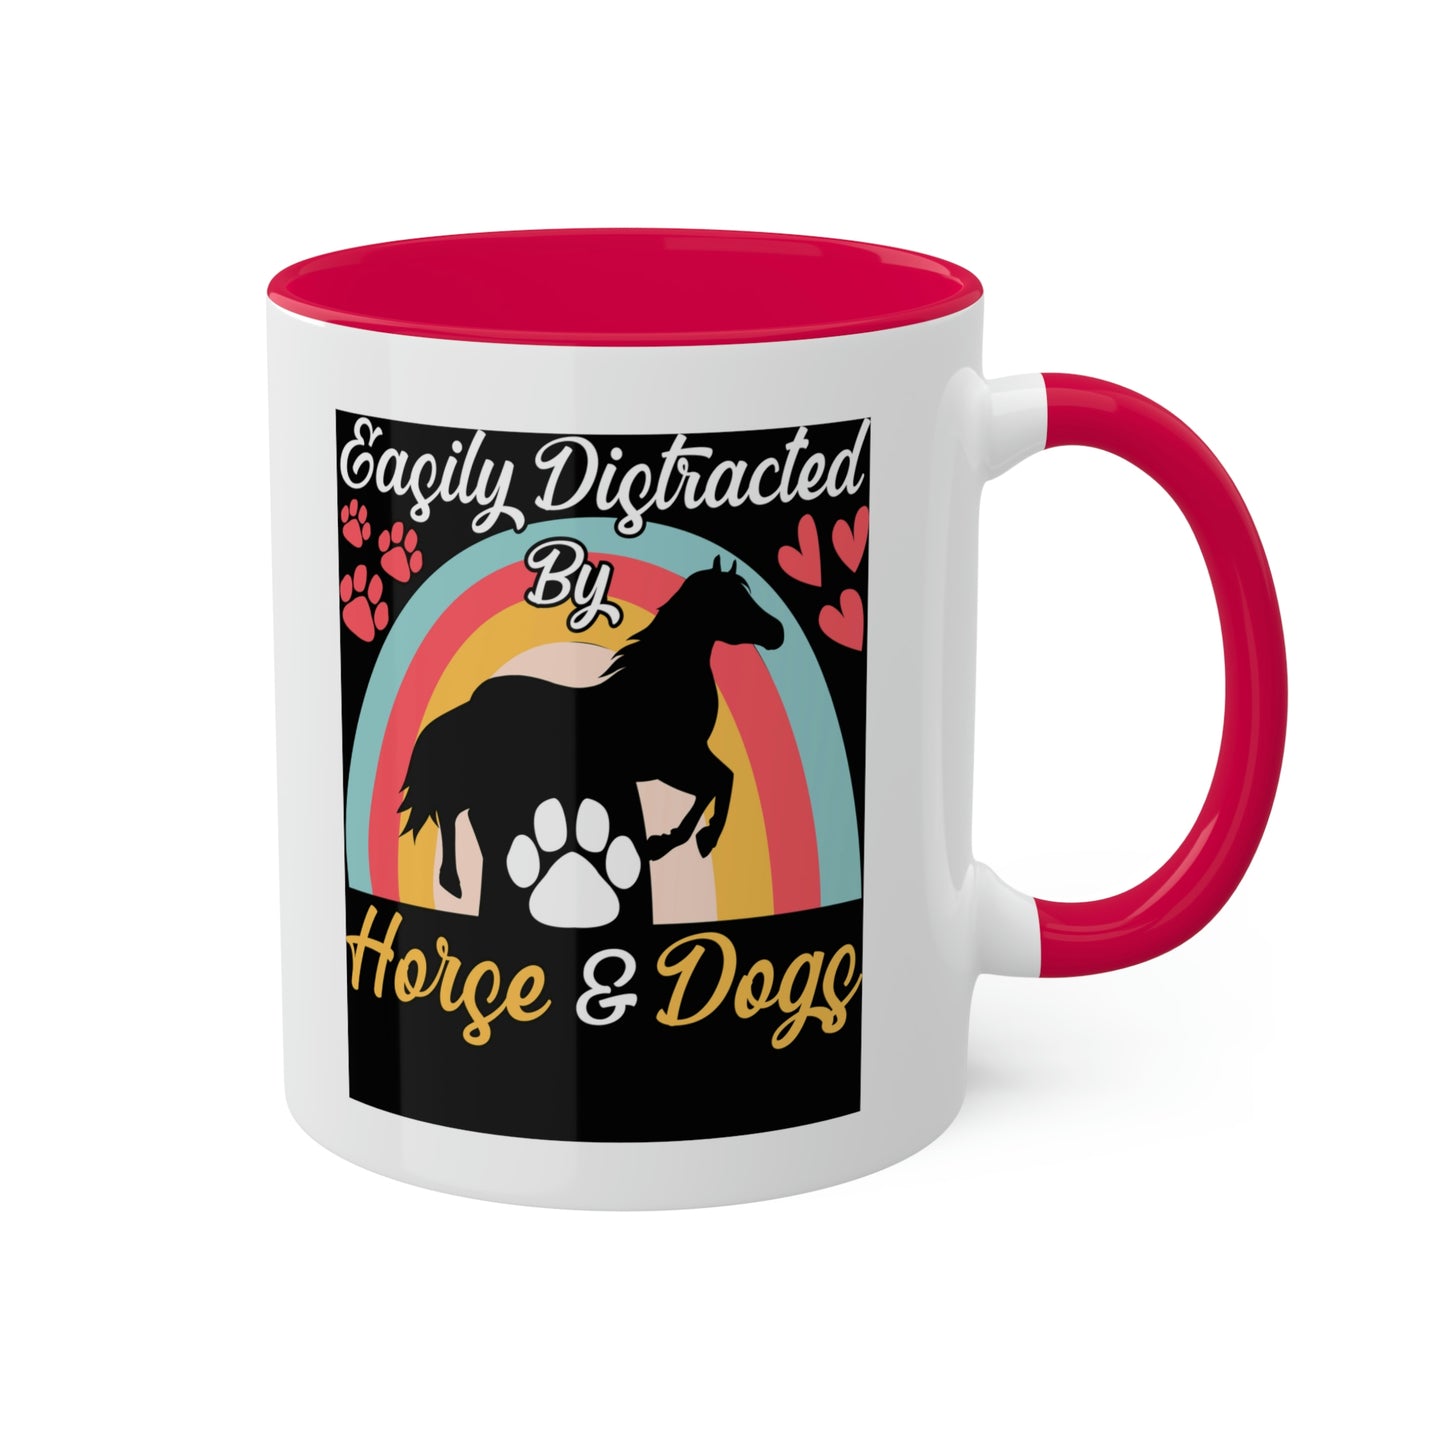 Easily Distracted by Horses and Dogs Accent Mug, 11oz